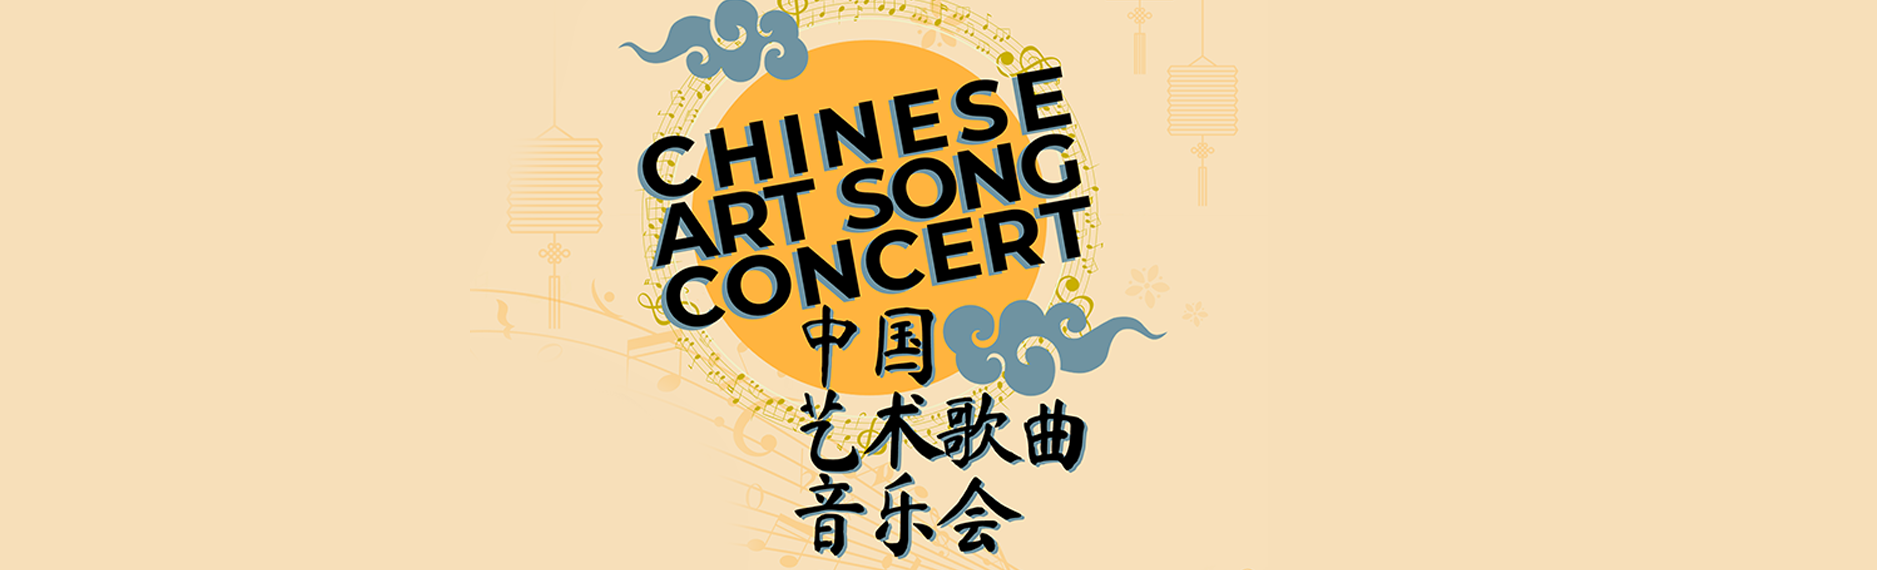 Chinese Art Song Concert